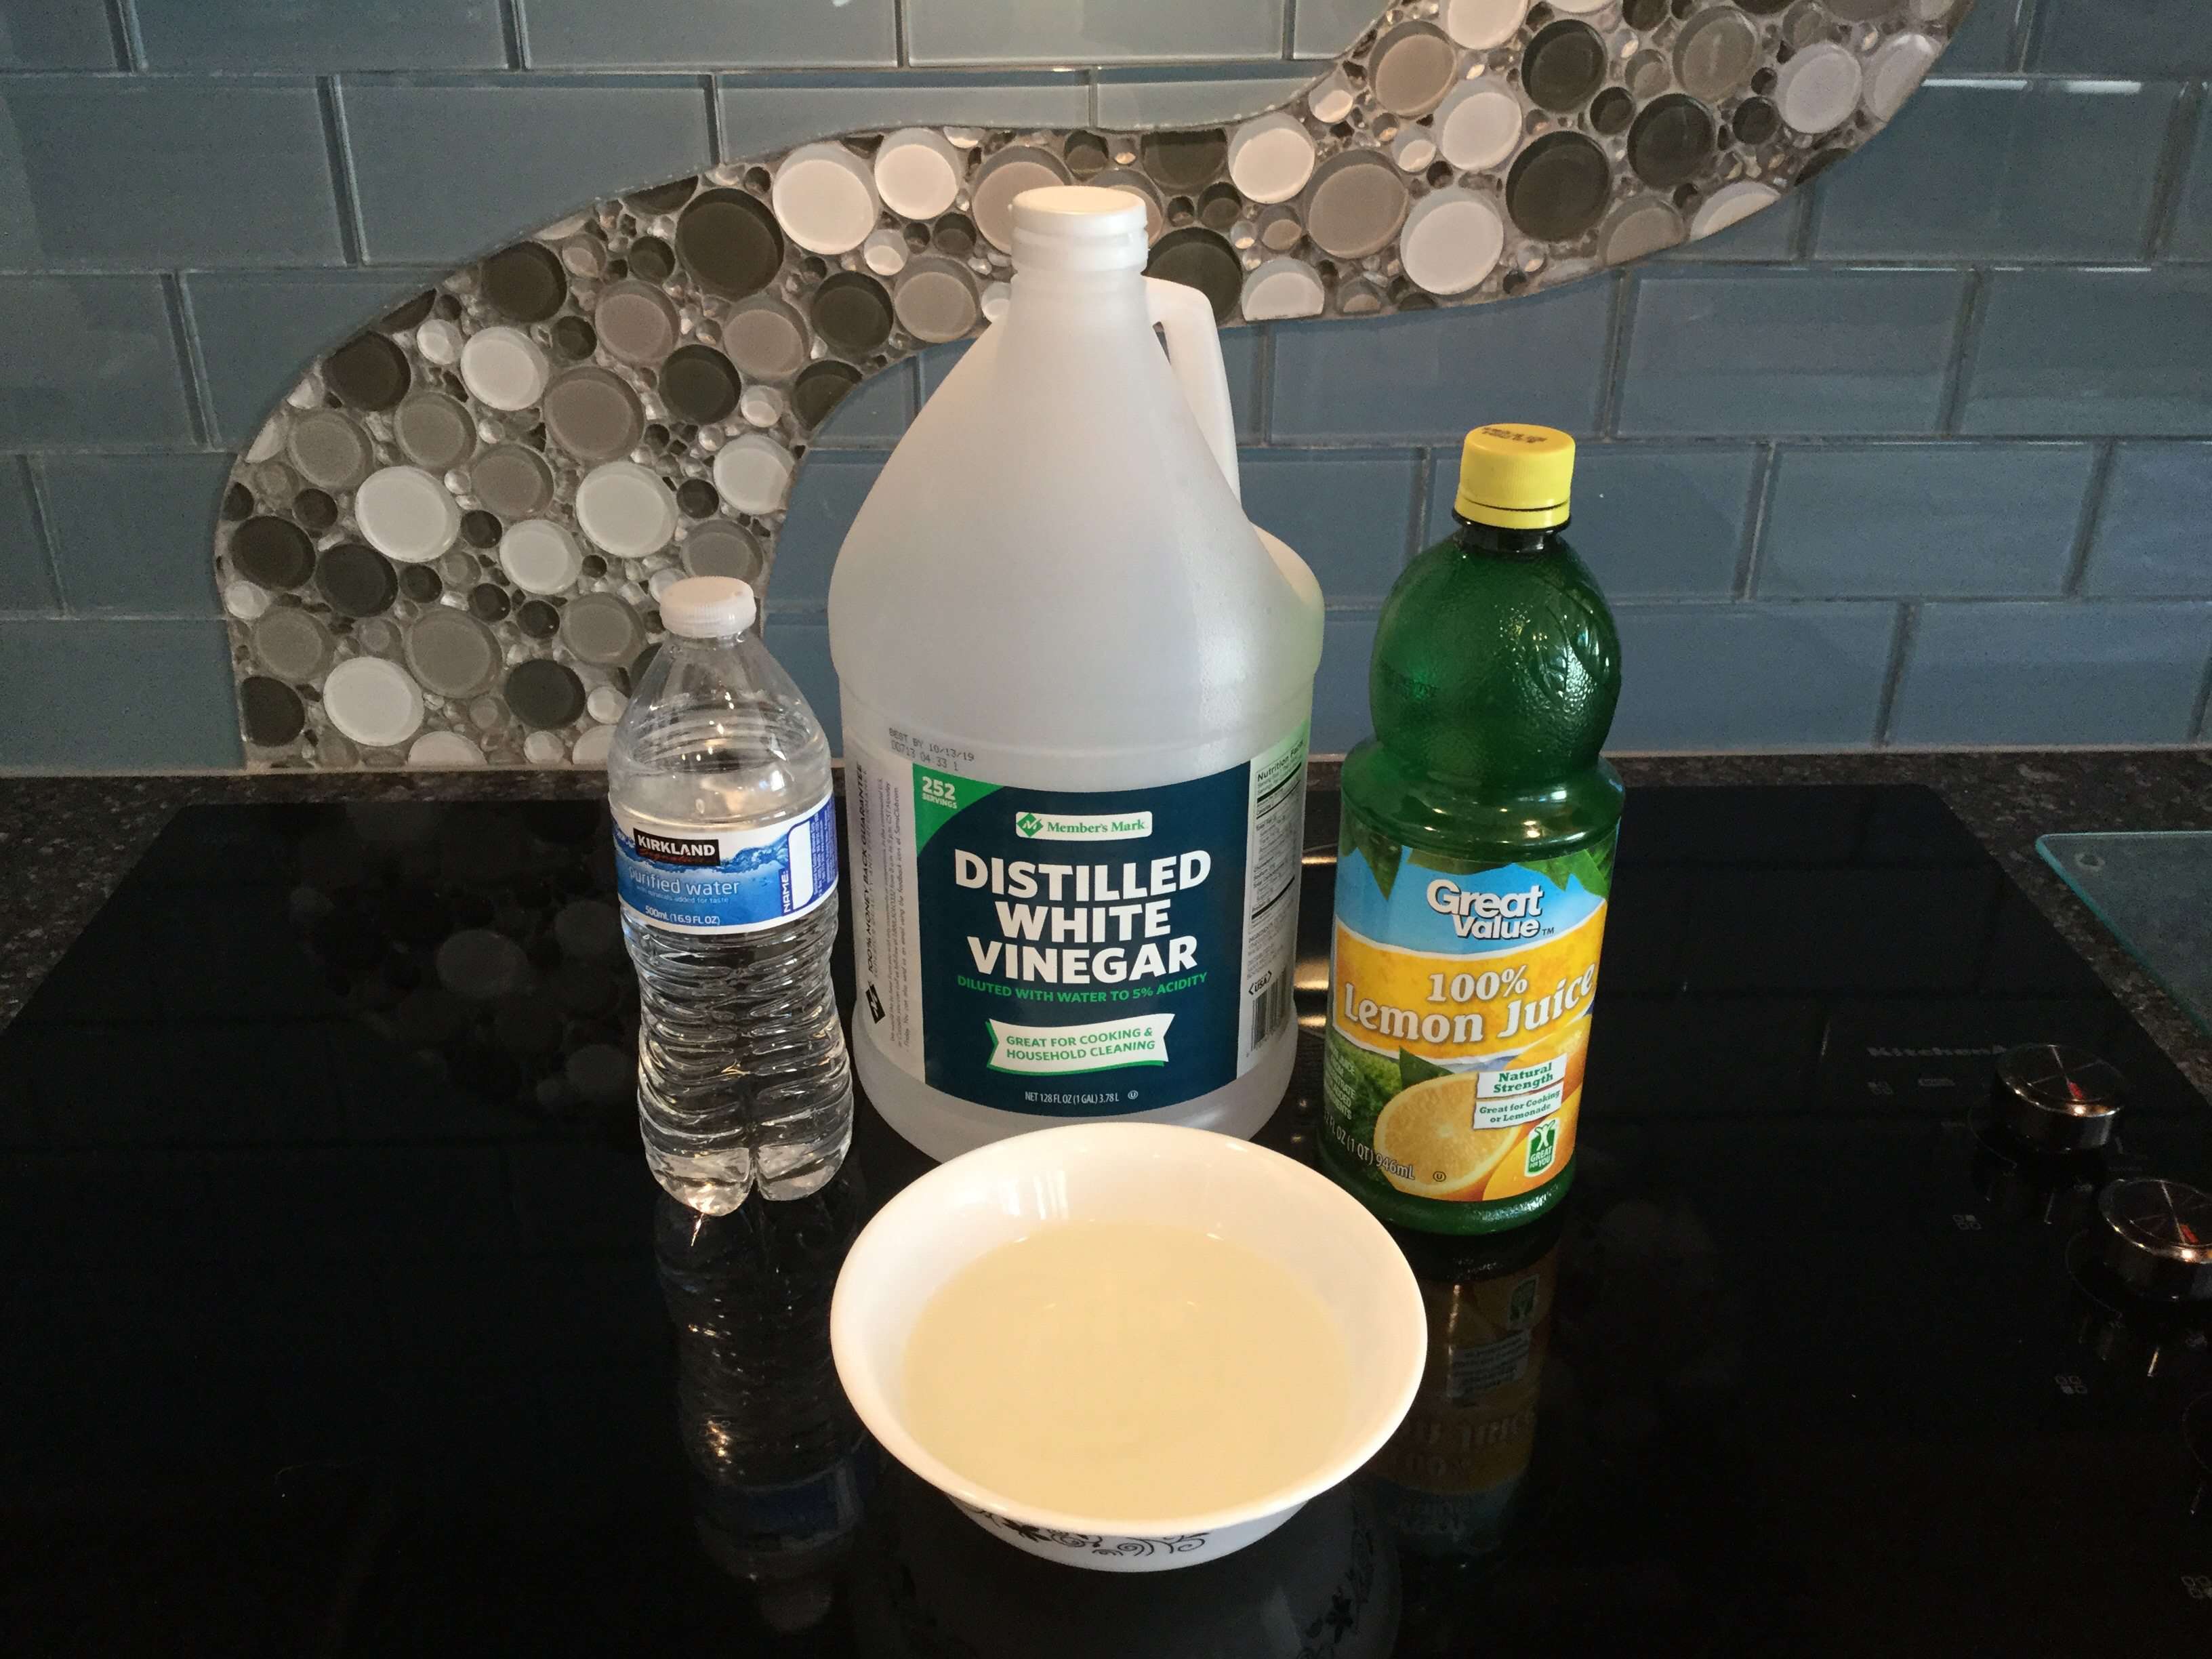 Pour 1 cup vinegar & 1 cup water in a bowl. Add 2 TBSP lemon juice. The acidity again is the cleaning agent in this mixture. Place the bowl in the microwave cook for approximately 7-10 minutes (depends on strength of microwave).